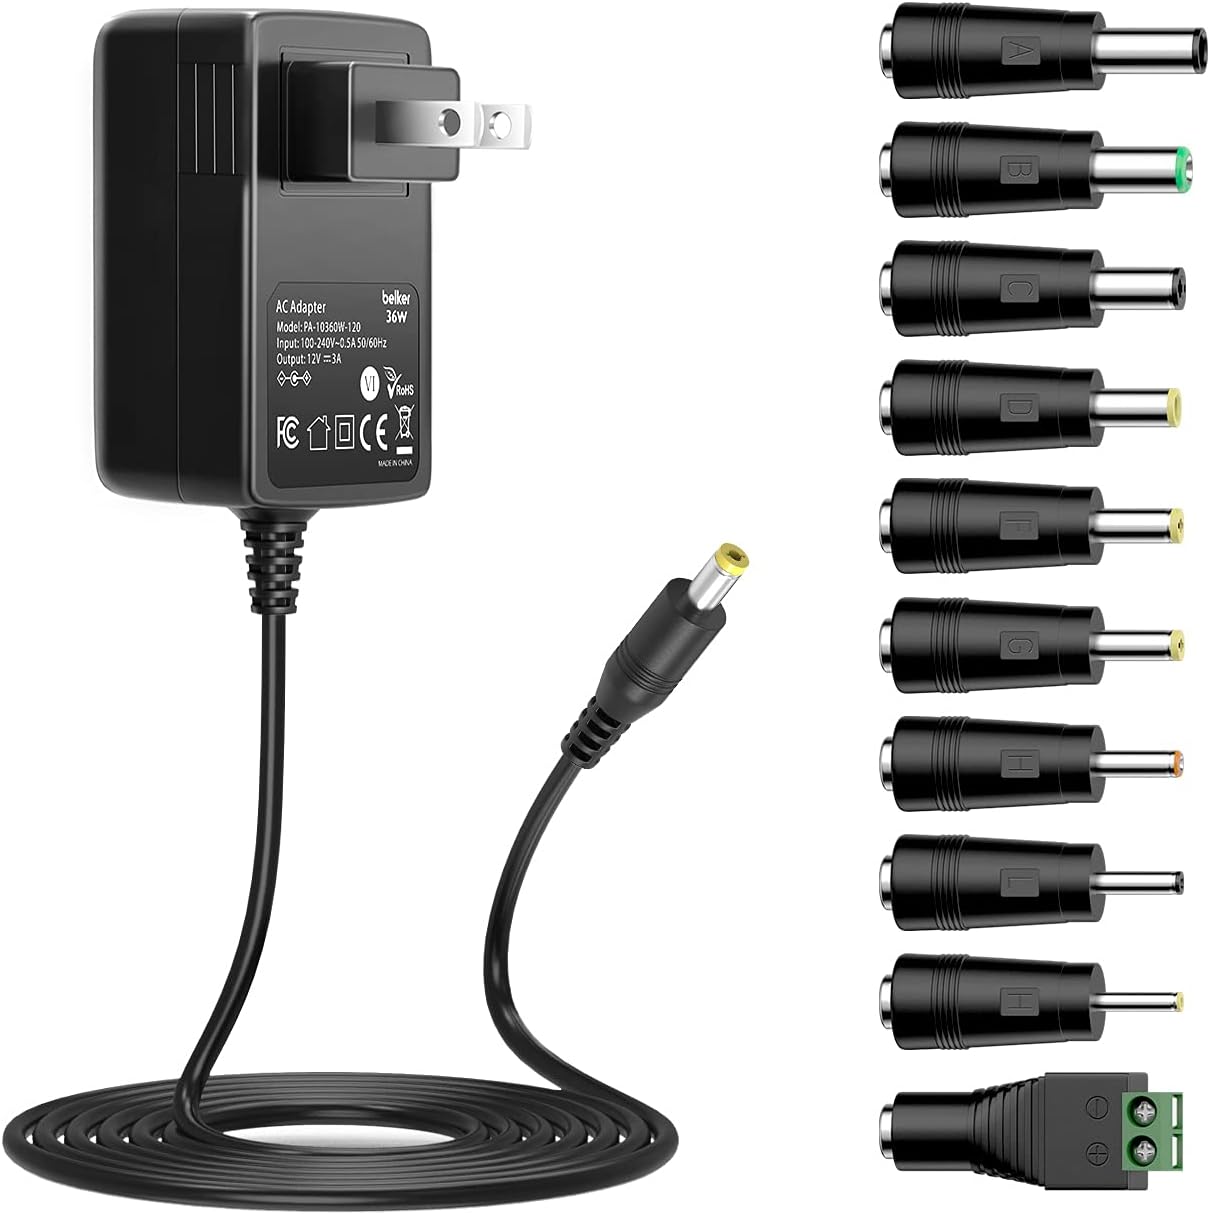 12V 3A 2.5A AC DC Power Adapter Supply Cord Wall Charger for 12 Volt Electronics - 3000mA Max. Connector Type Barrel Co